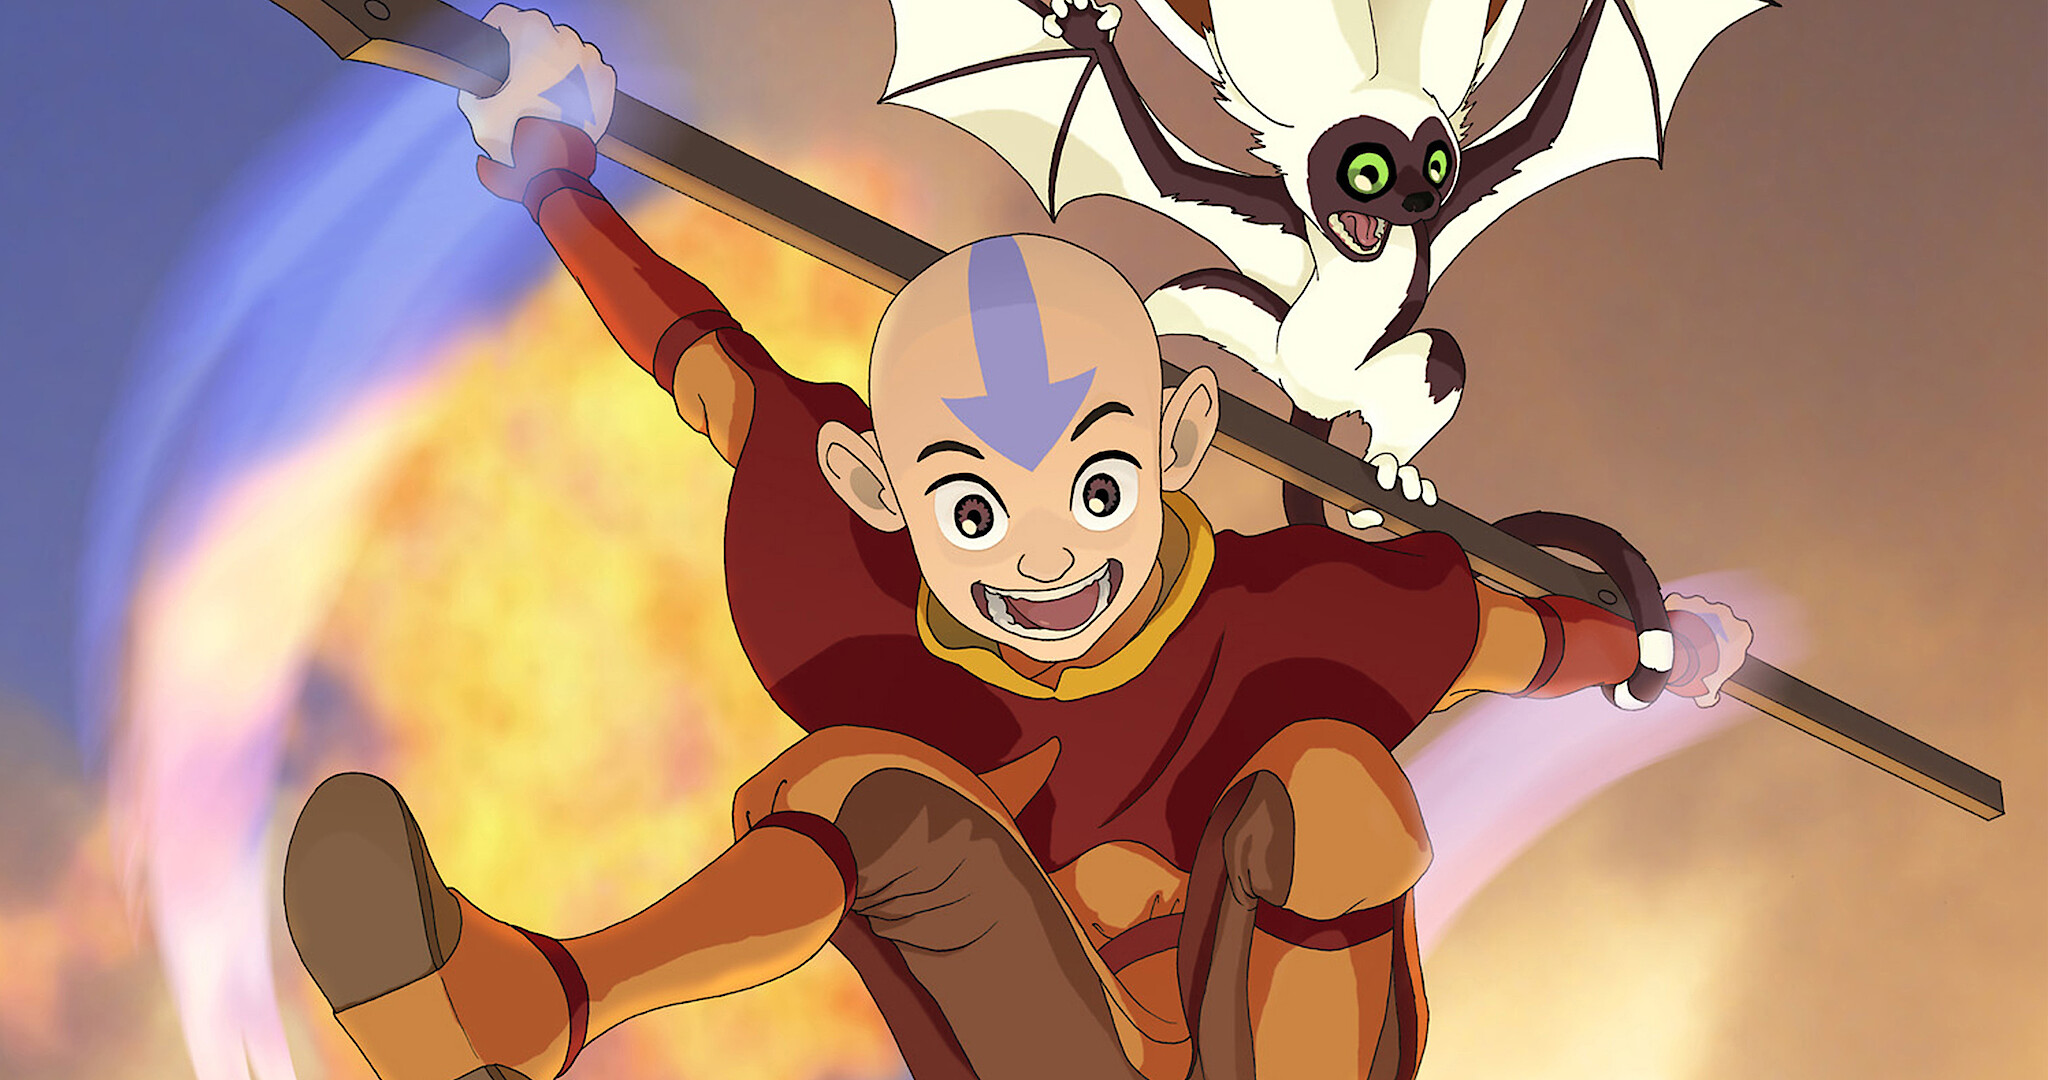 Avatar: The Last Airbender: The Search, Part 2